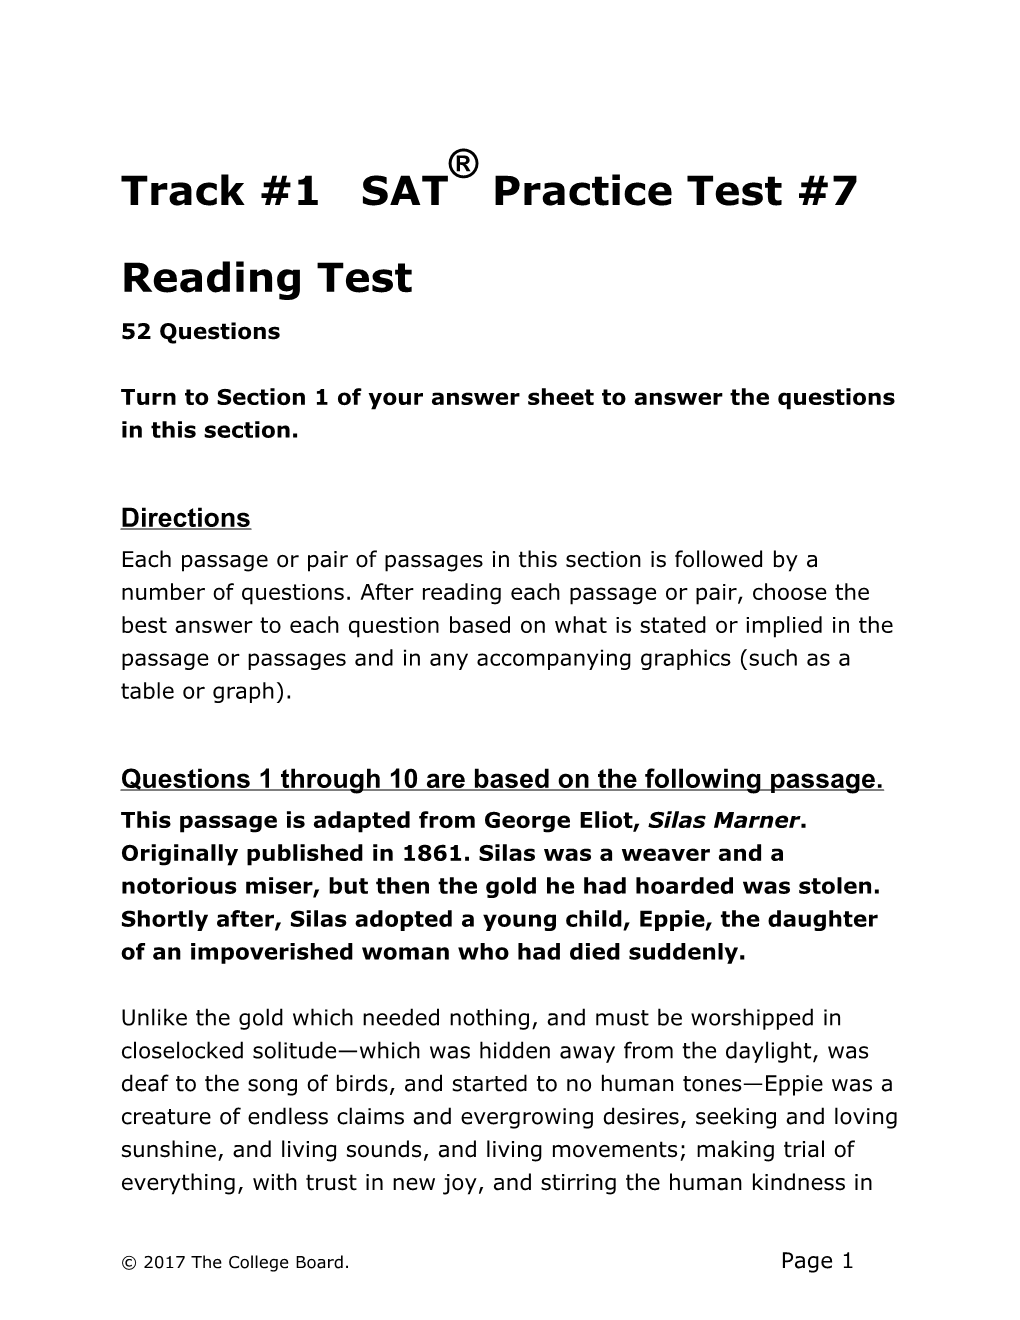 SAT Practice Test 7 For Assistive Technology – Reading Test | SAT Suite Of Assessments – The College Board